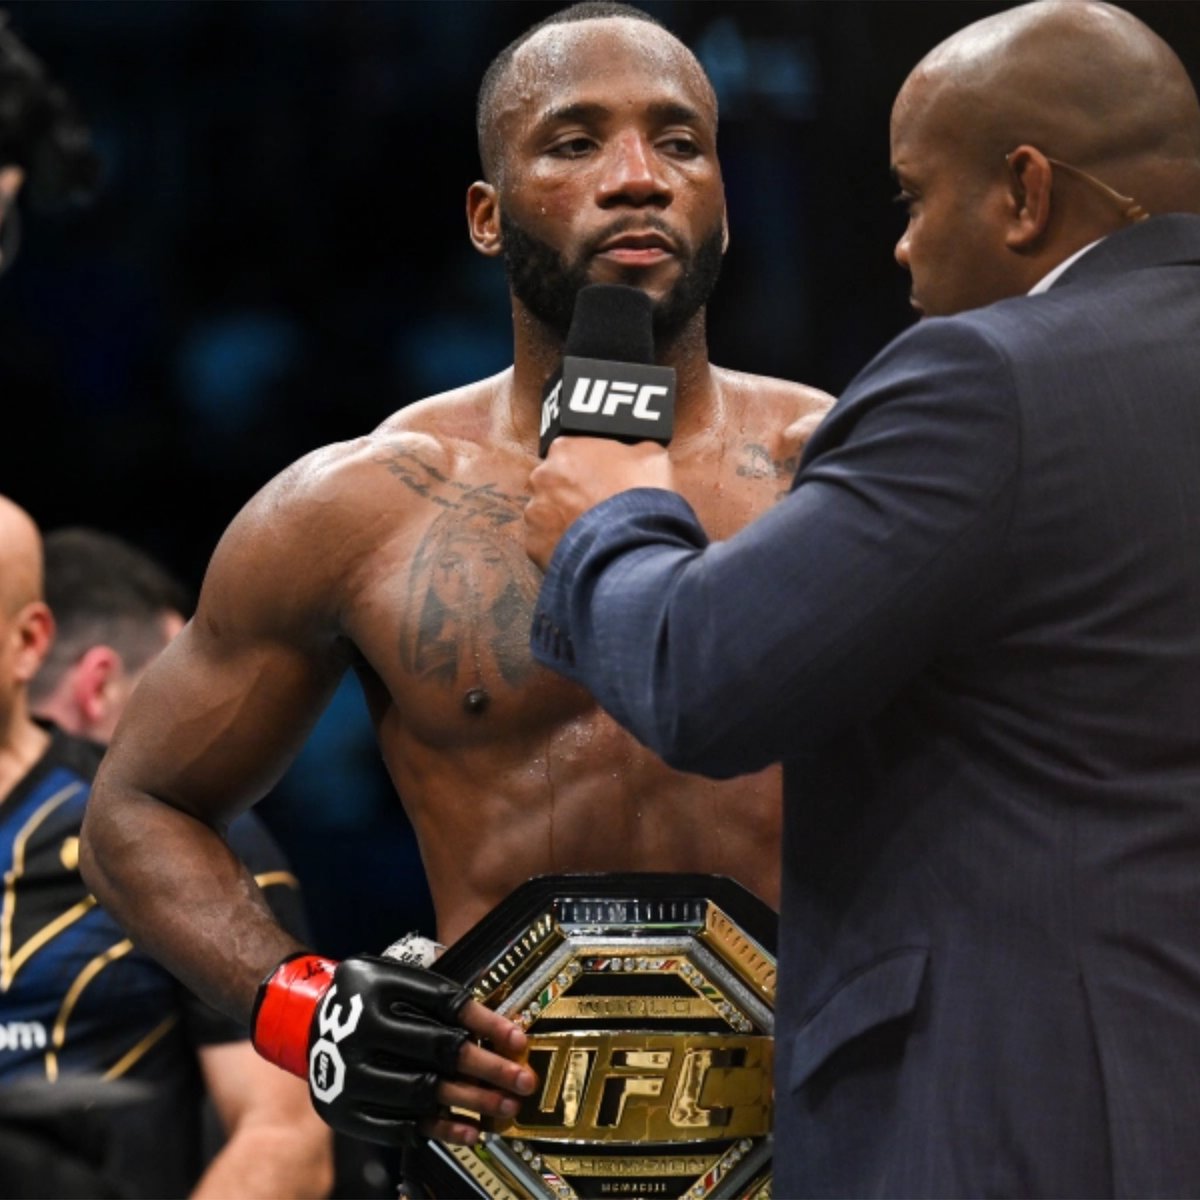 🚨| Leon Edwards remain insistent that he will not fight Colby Covington next. 

“I definitely have a say [on next opponent]. He’s not getting it [the title shot].”

He also said if he is presented a contract with Colby’s name on it then he will NOT sign it.

[per The MMA Hour]